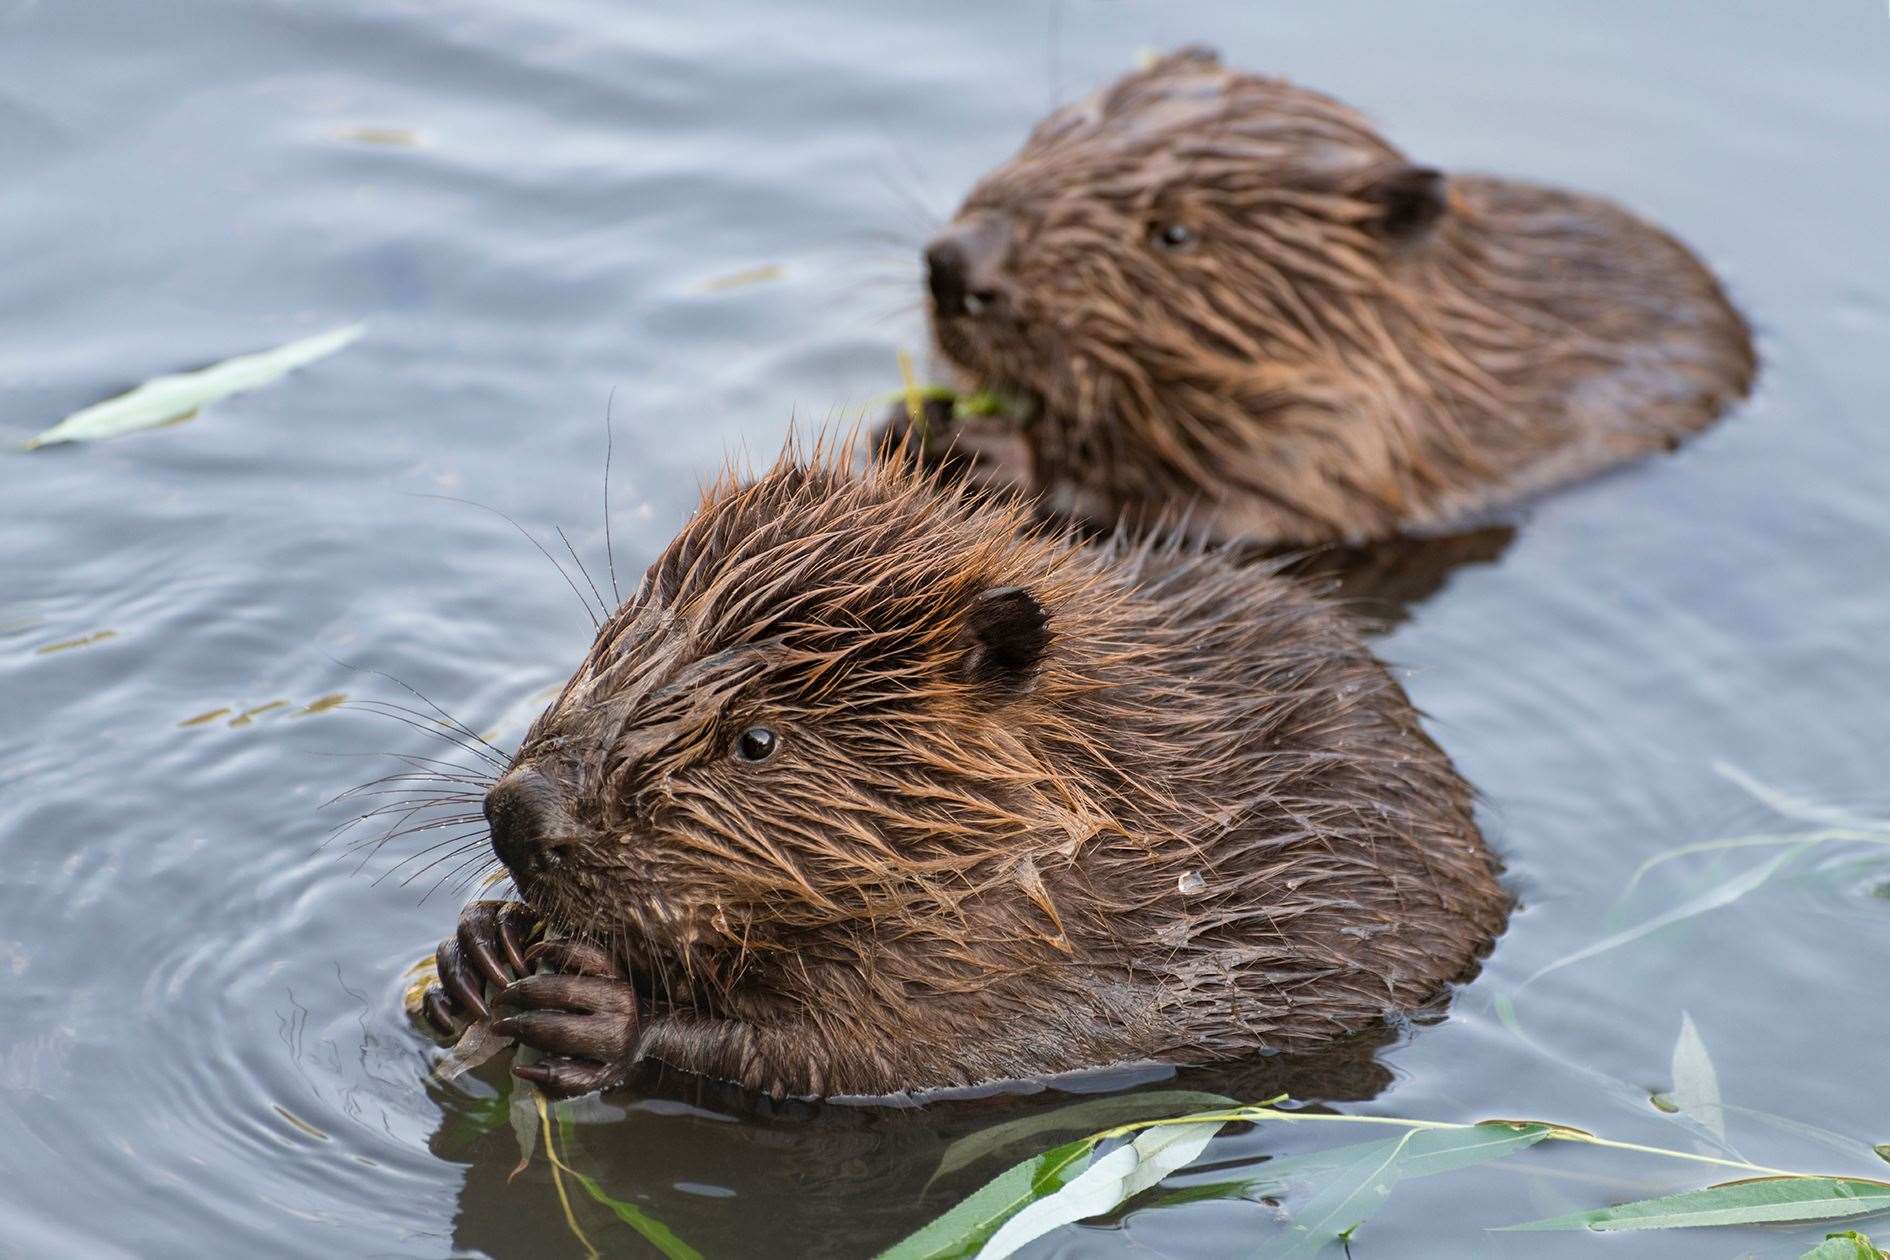 A decision is expected very soon on the return of beavers to Badenoch and Strathspey.